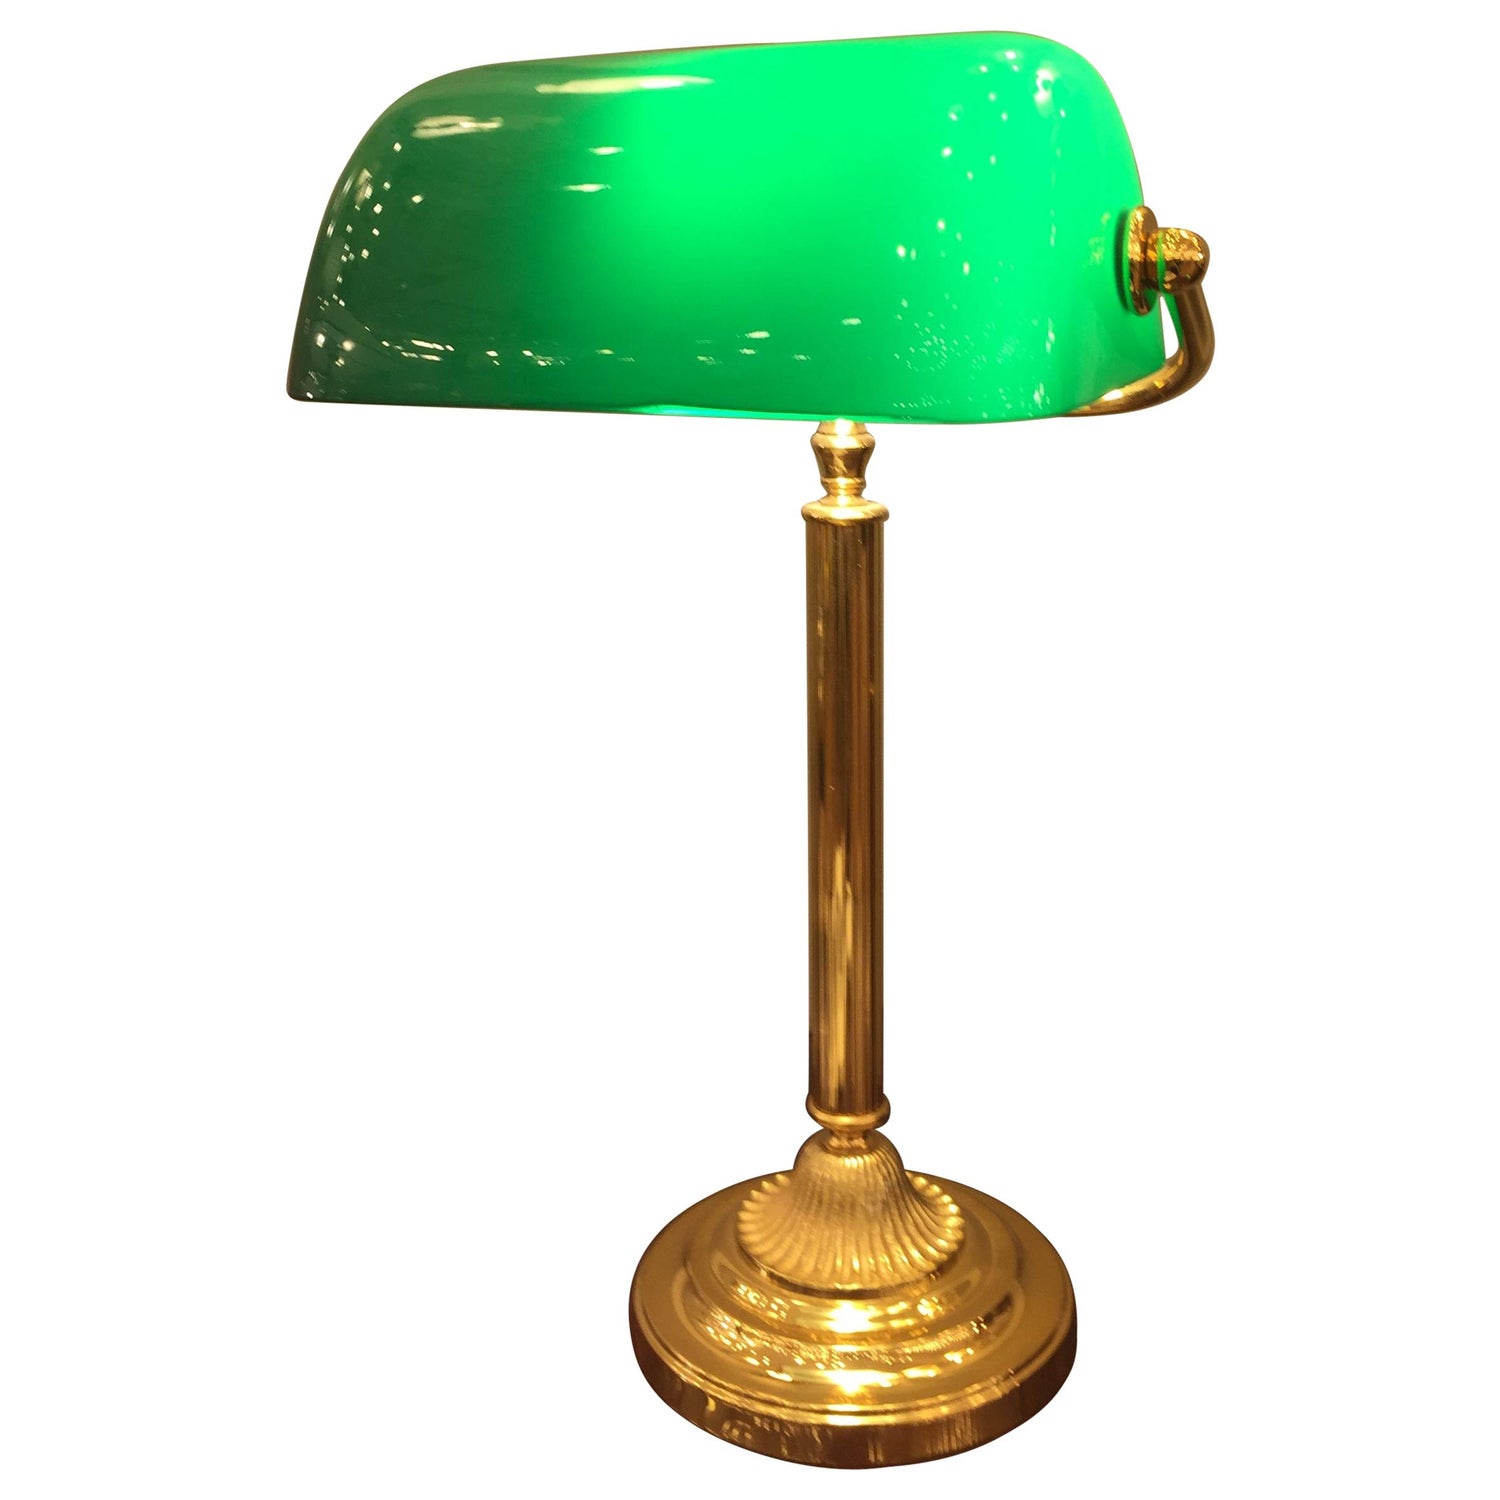 Antique Green Bankers Lamp - 7 For Sale on 1stDibs